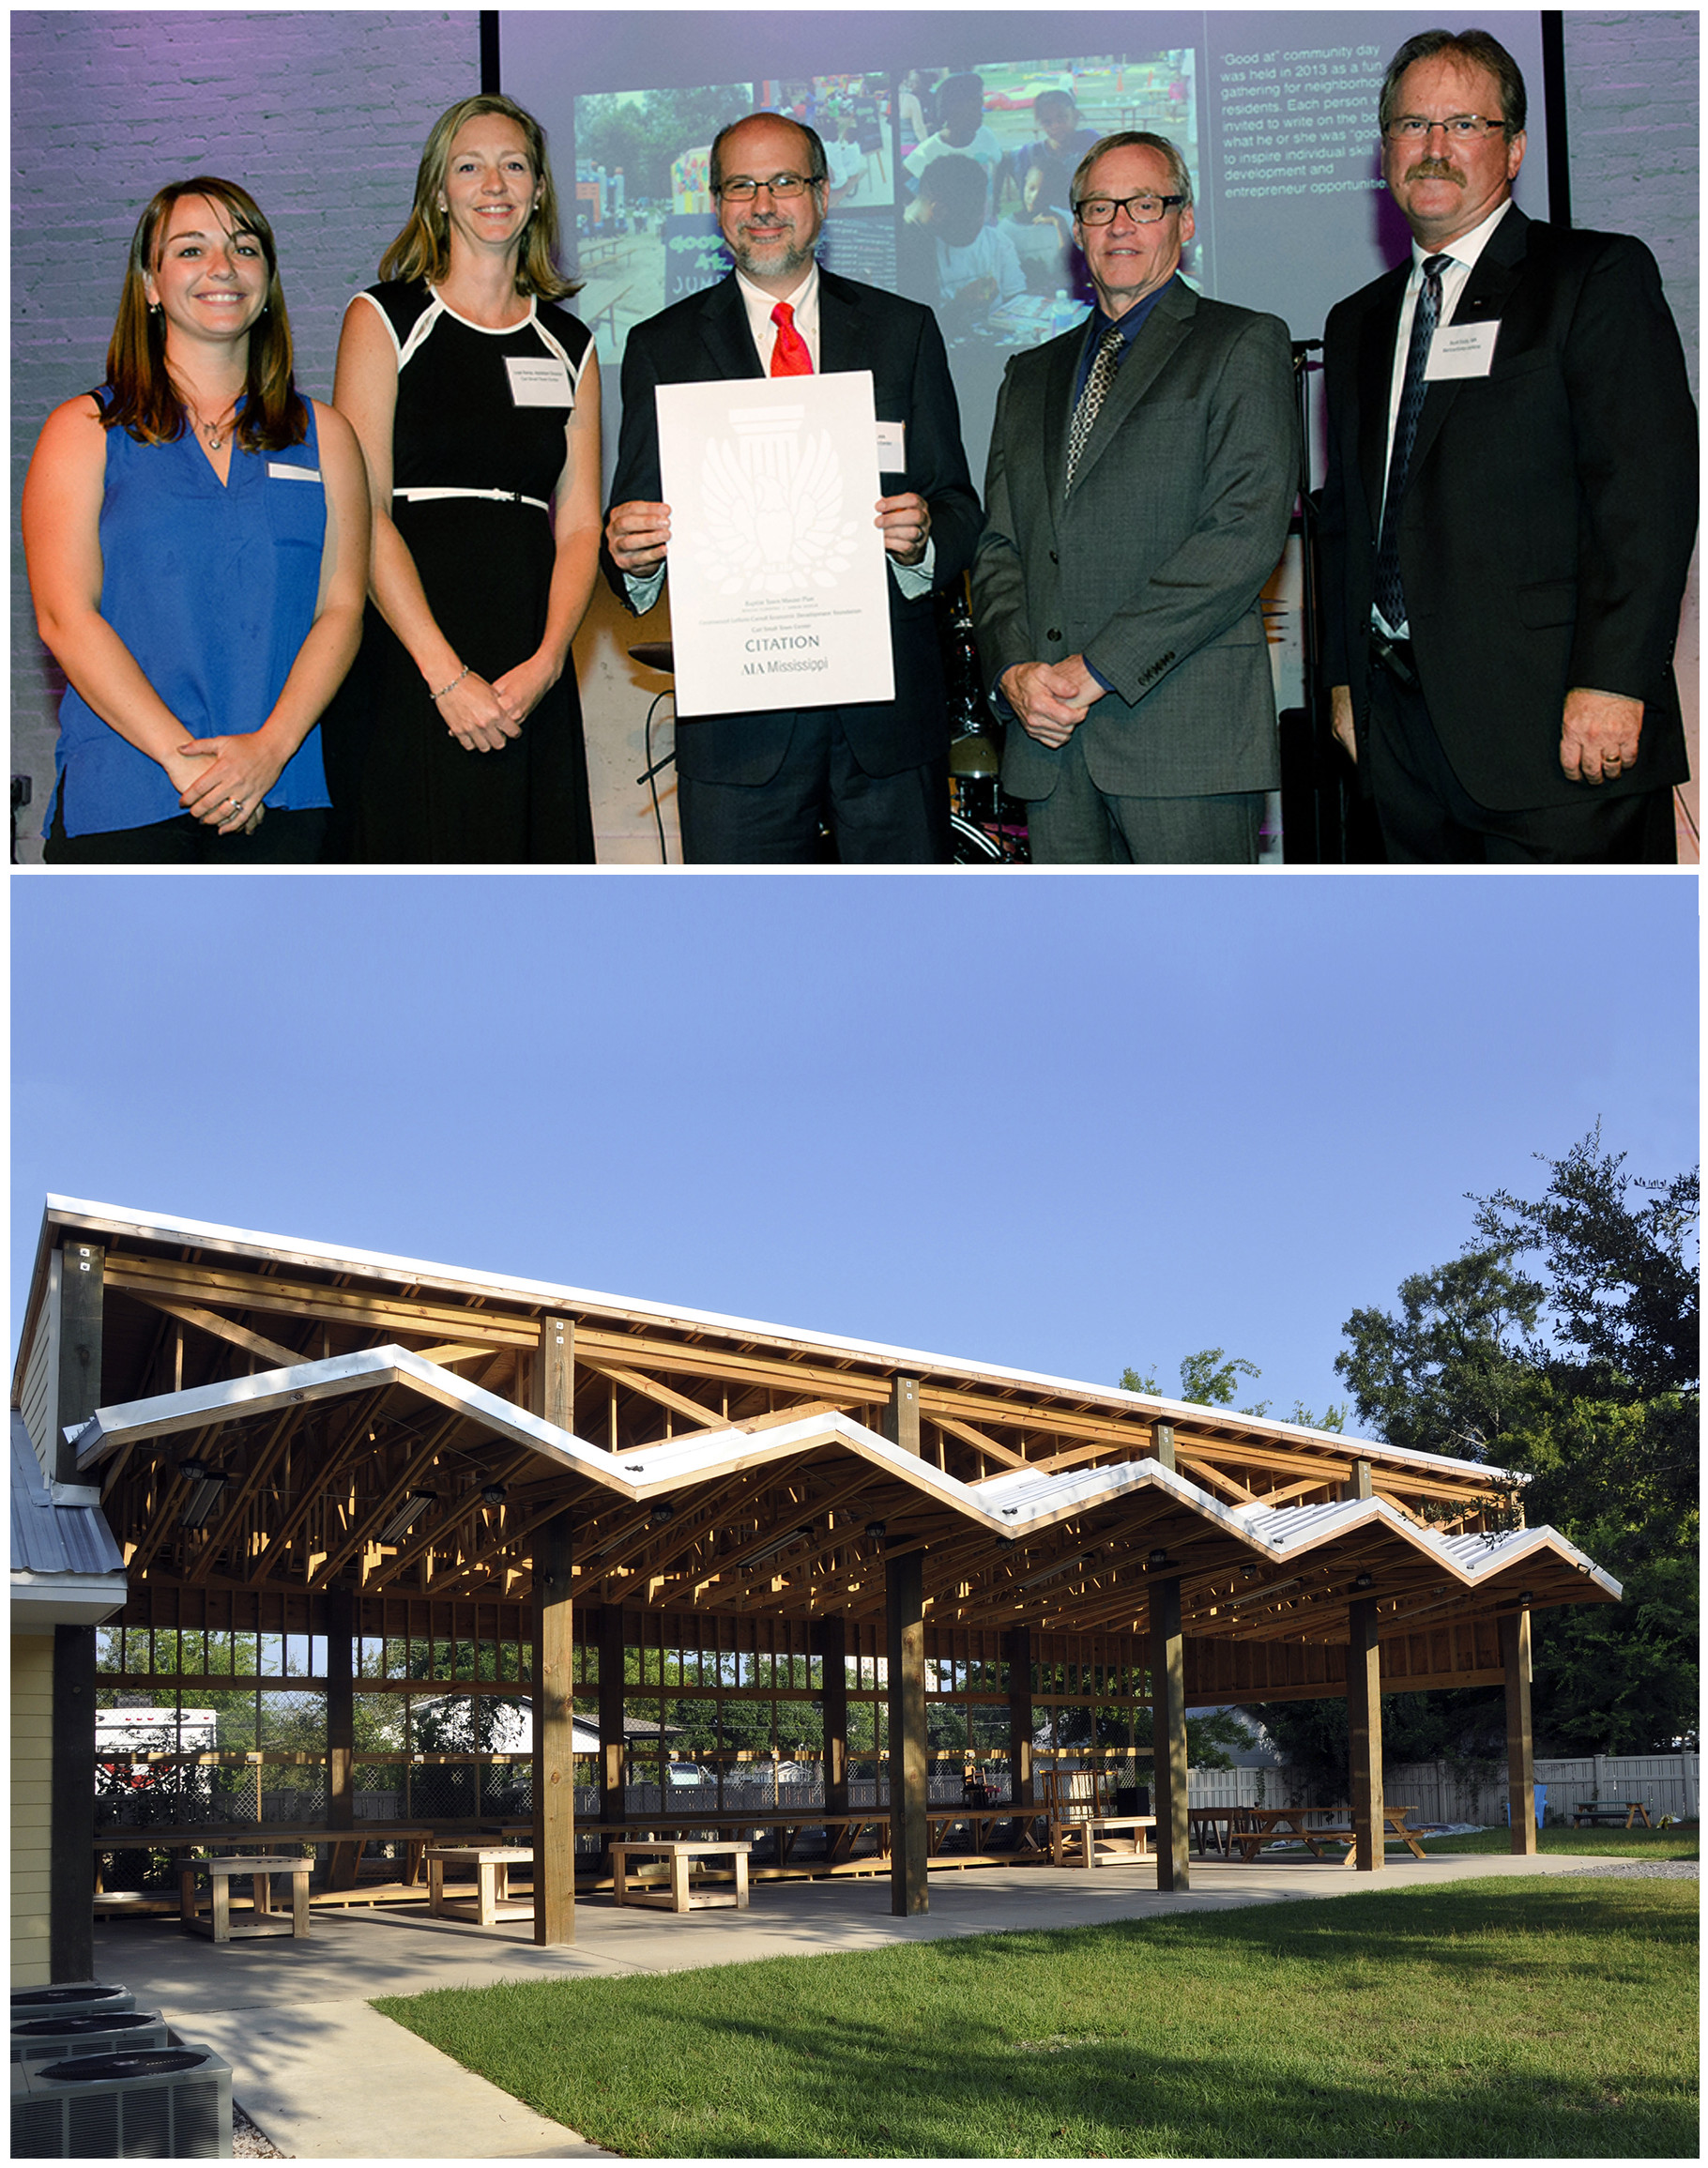 Top: The Mississippi Chapter of the American Institute of Architects honored Mississippi State University's Carl Small Town Center with Citation Award in the master planning and urban design category for the Baptist Town master plan. From left are Enterprise Rose Architectural Fellow Emily Roush Elliot, CSTC Assistant Director Leah Faulk-Kemp, CSTC Director John Poros, MSU College of Architecture, Art and Design Dean Jim West, and AIA Mississippi Board of Directors President J. Scott Eddy.</p>
<p>Bottom: Gulf Coast Community Design Studio also won an honor award in the architecture/new construction category for the Women in Construction Training Center in the Moore Community House.<br />
